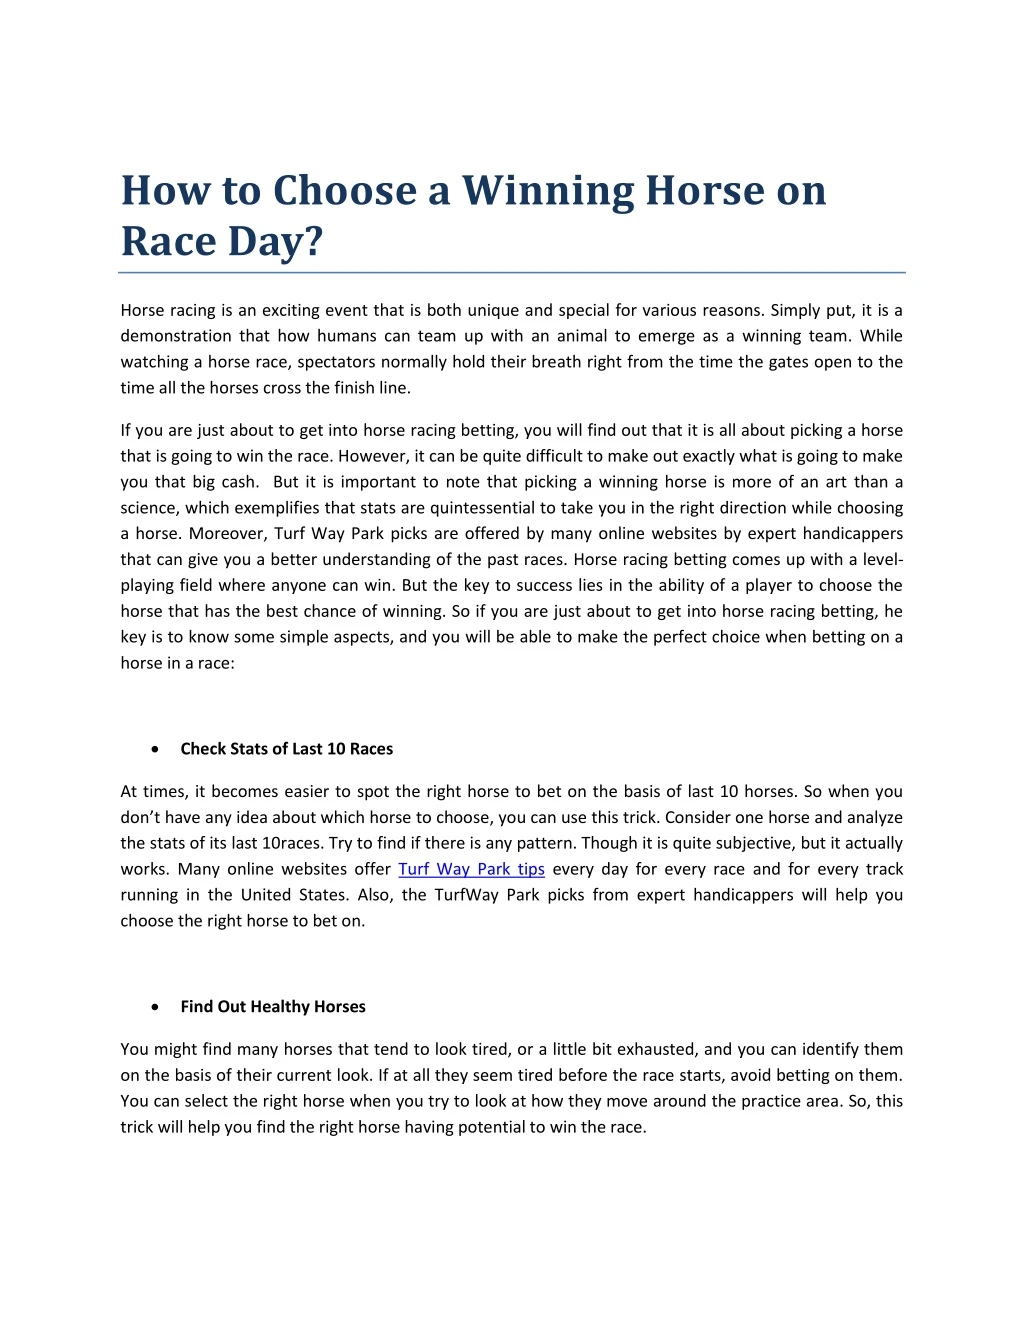 how to choose a winning horse on race day